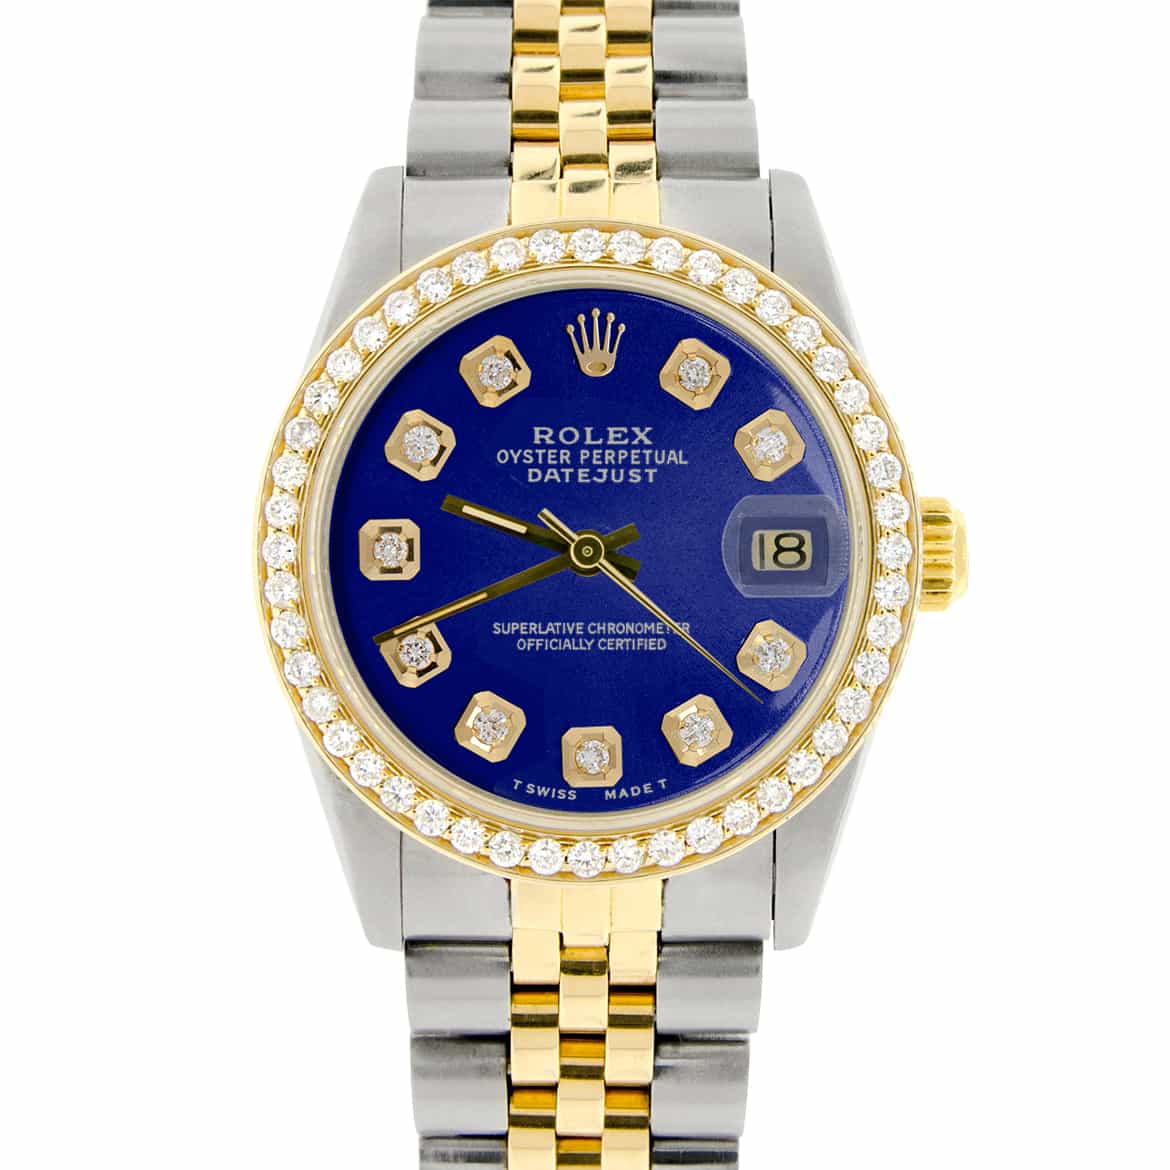 Rolex Lady-Datejust 28, 18kt Yellow Gold and diamonds, Ref